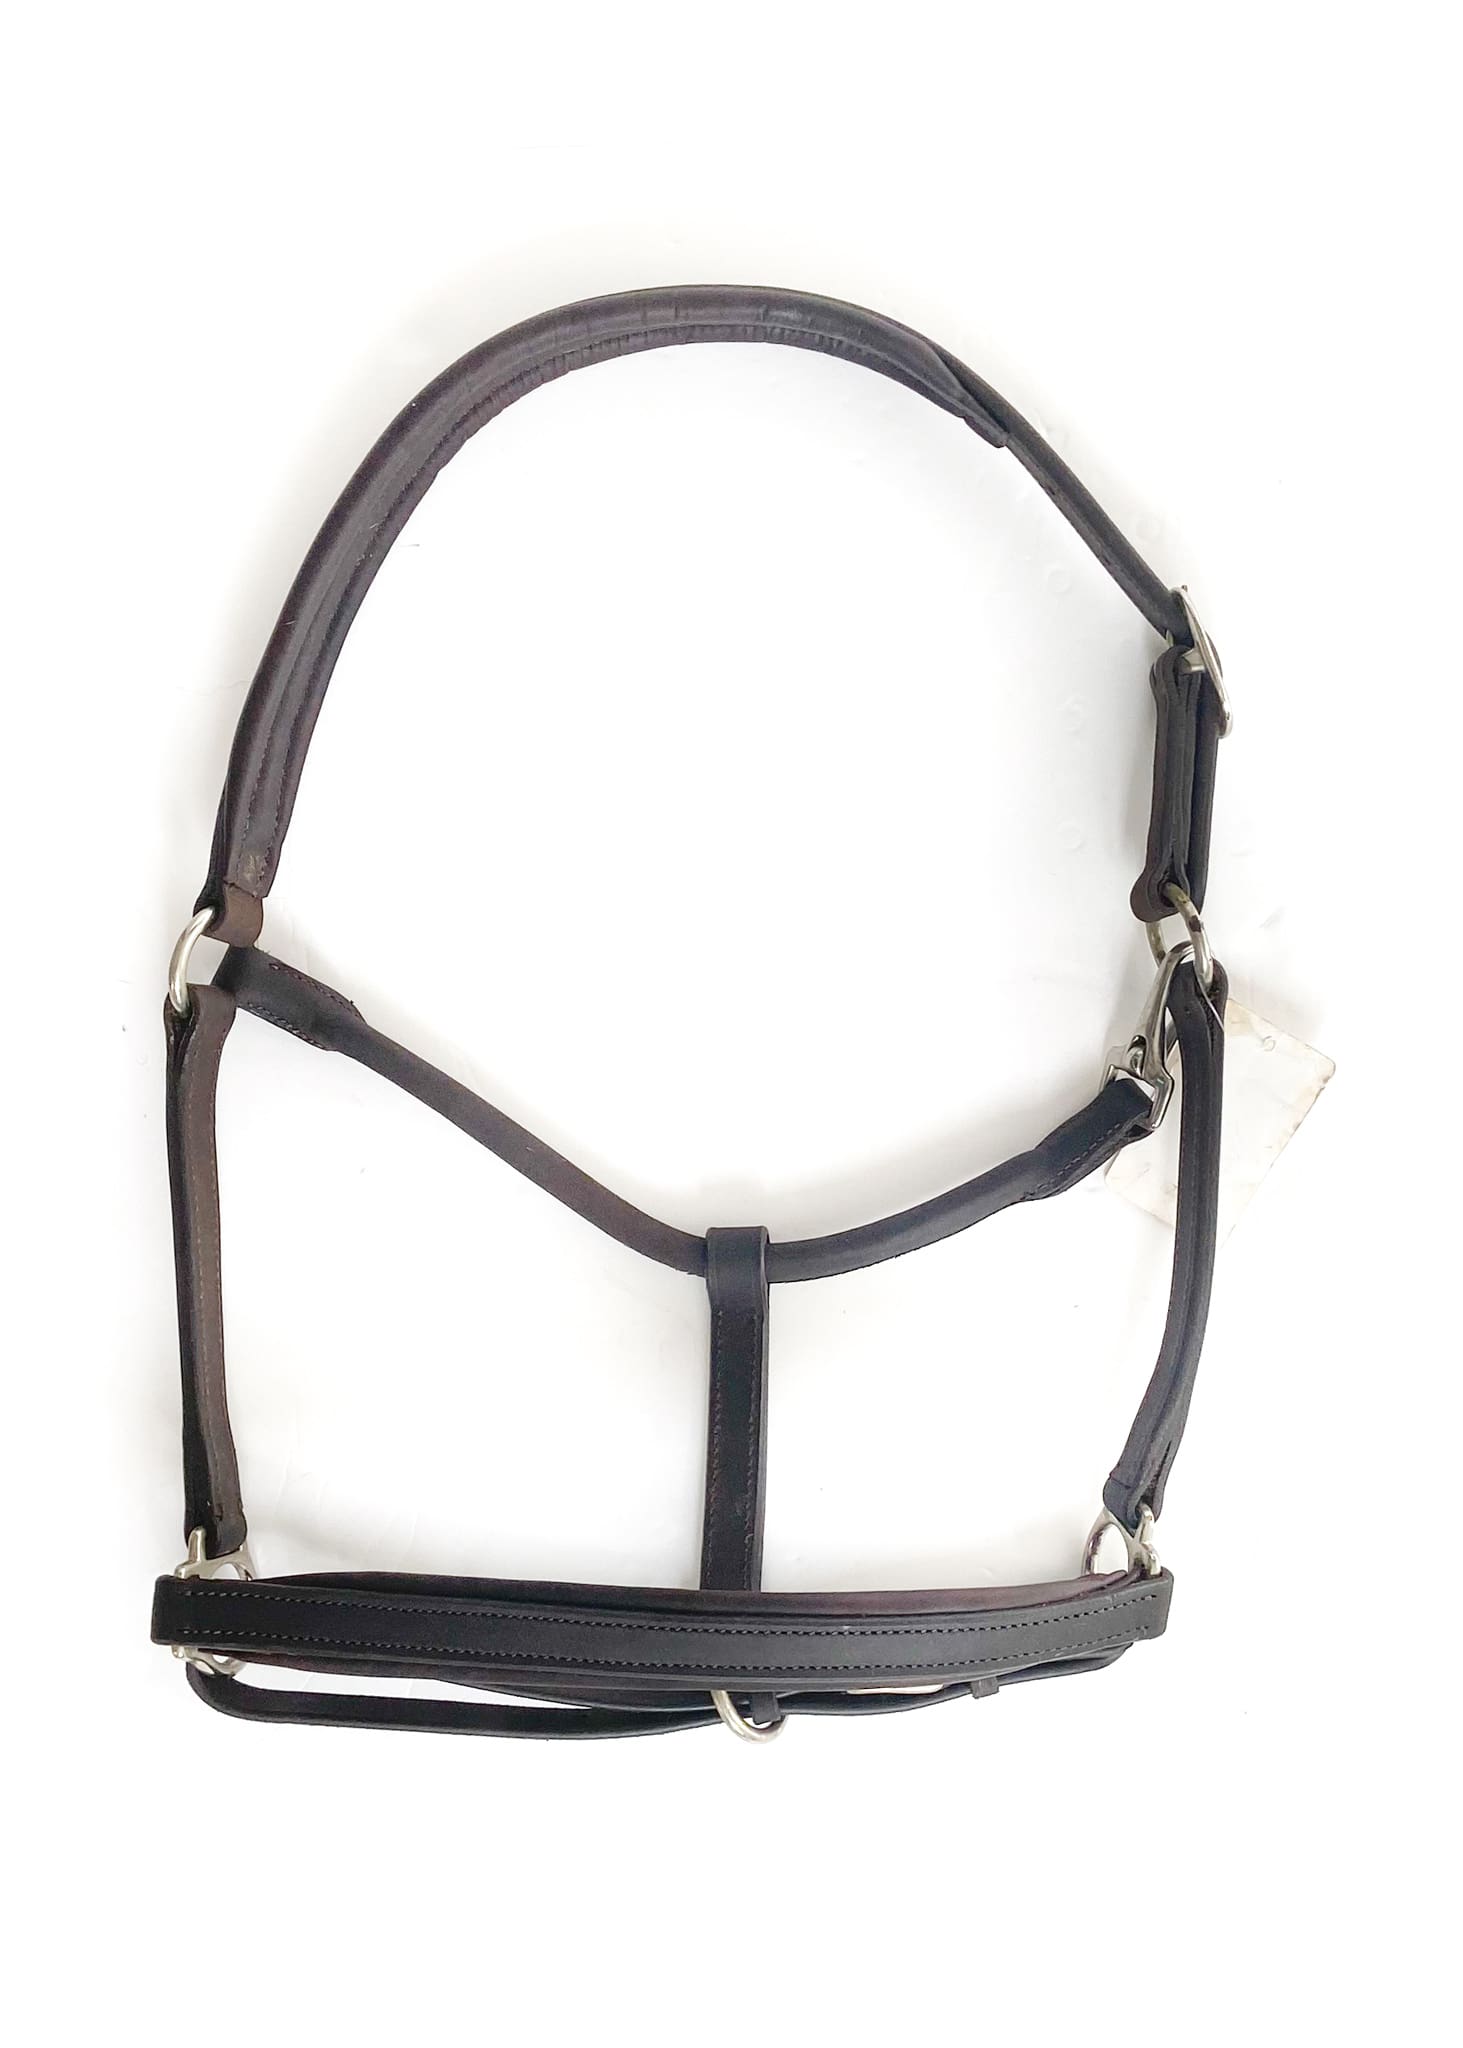 Padded leather halter in chocolate colour.